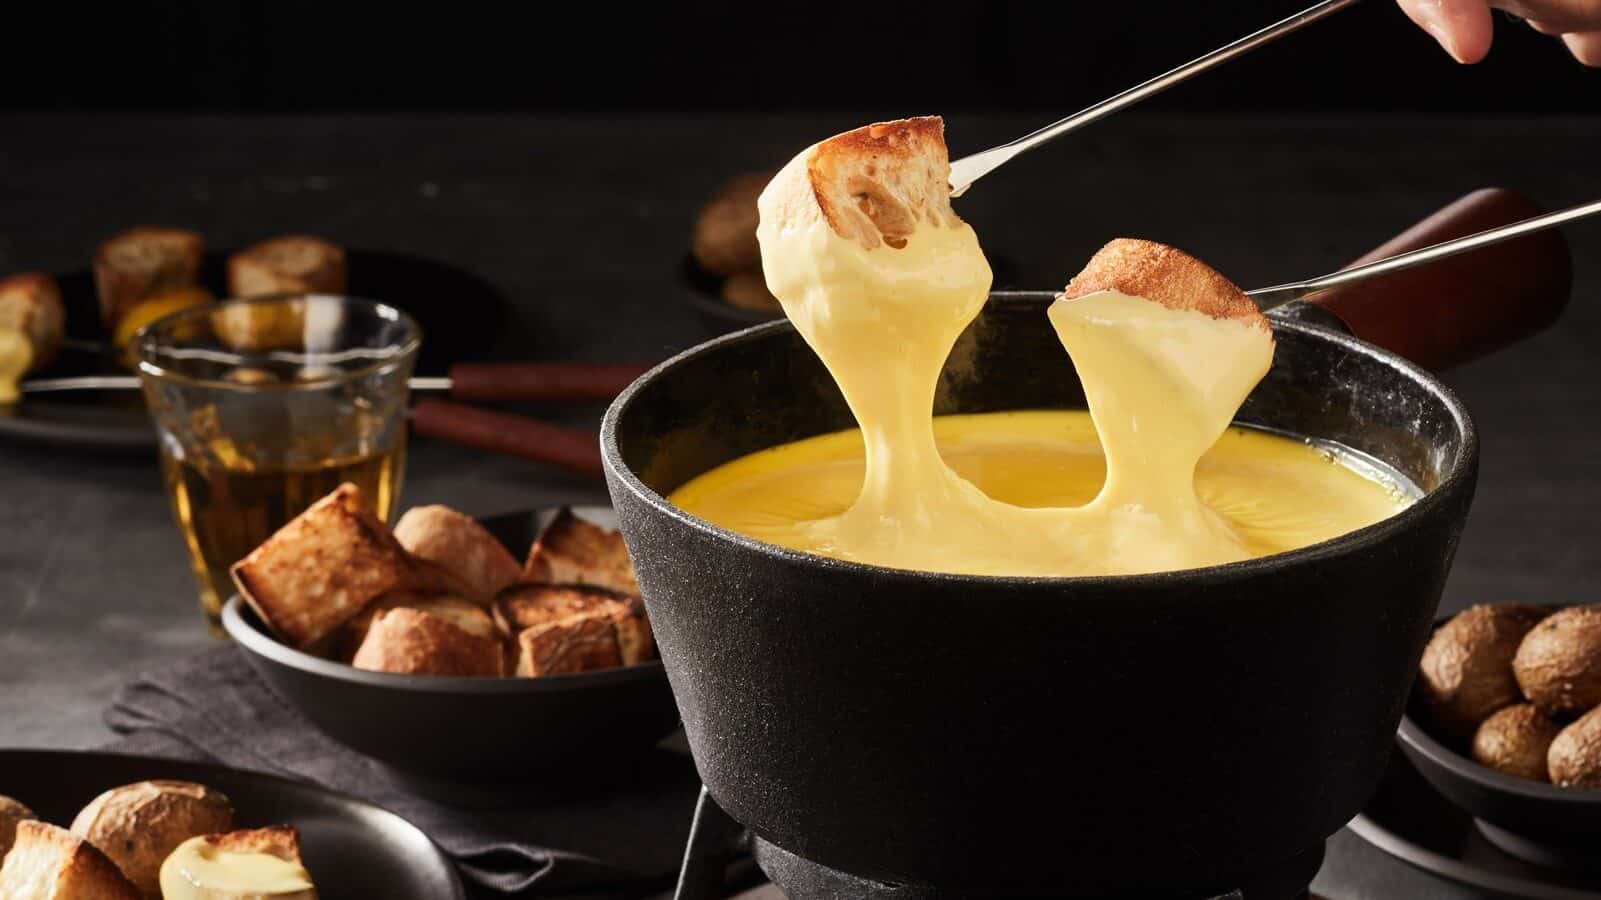 Two pieces of bread are dipped into a fondue pot  of melted cheese